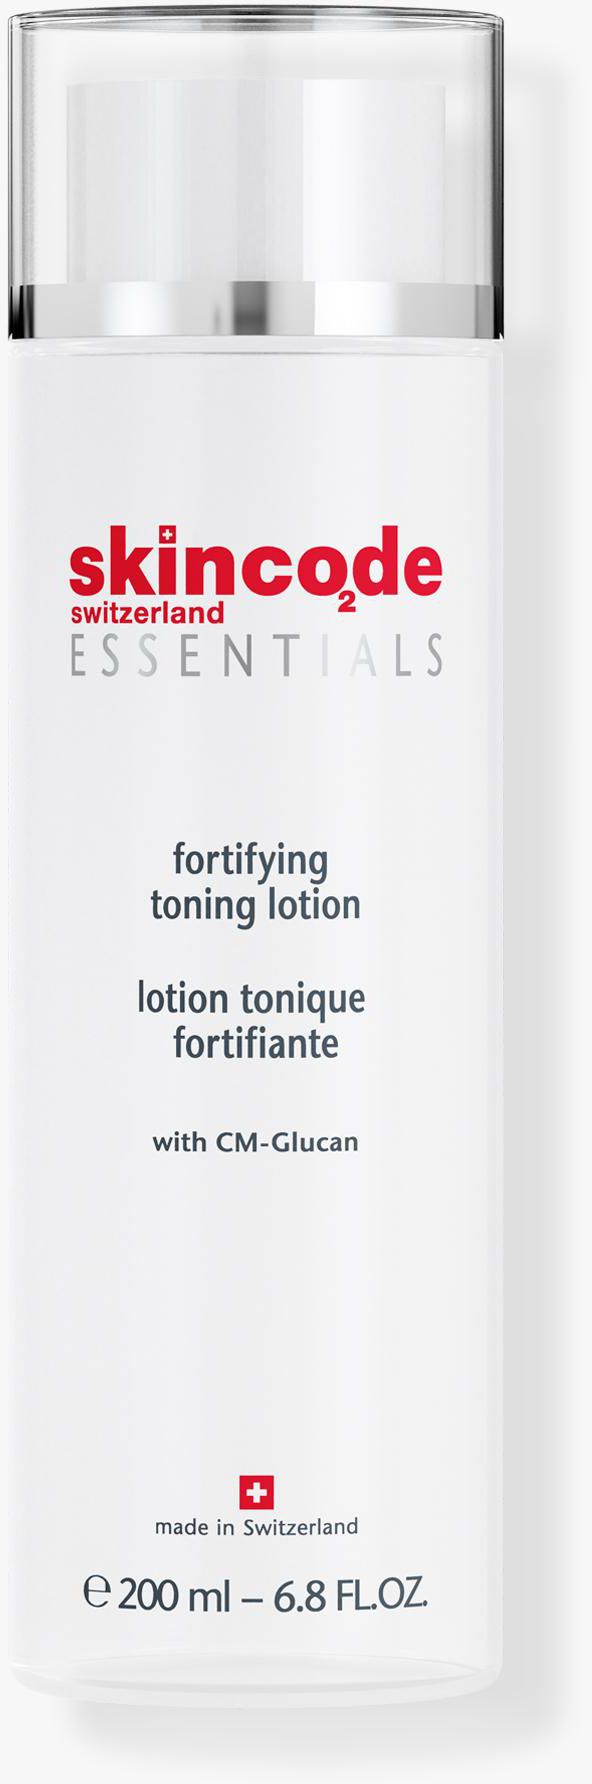 Skincode Essentials Fortifying Toning Lotion - 200ML